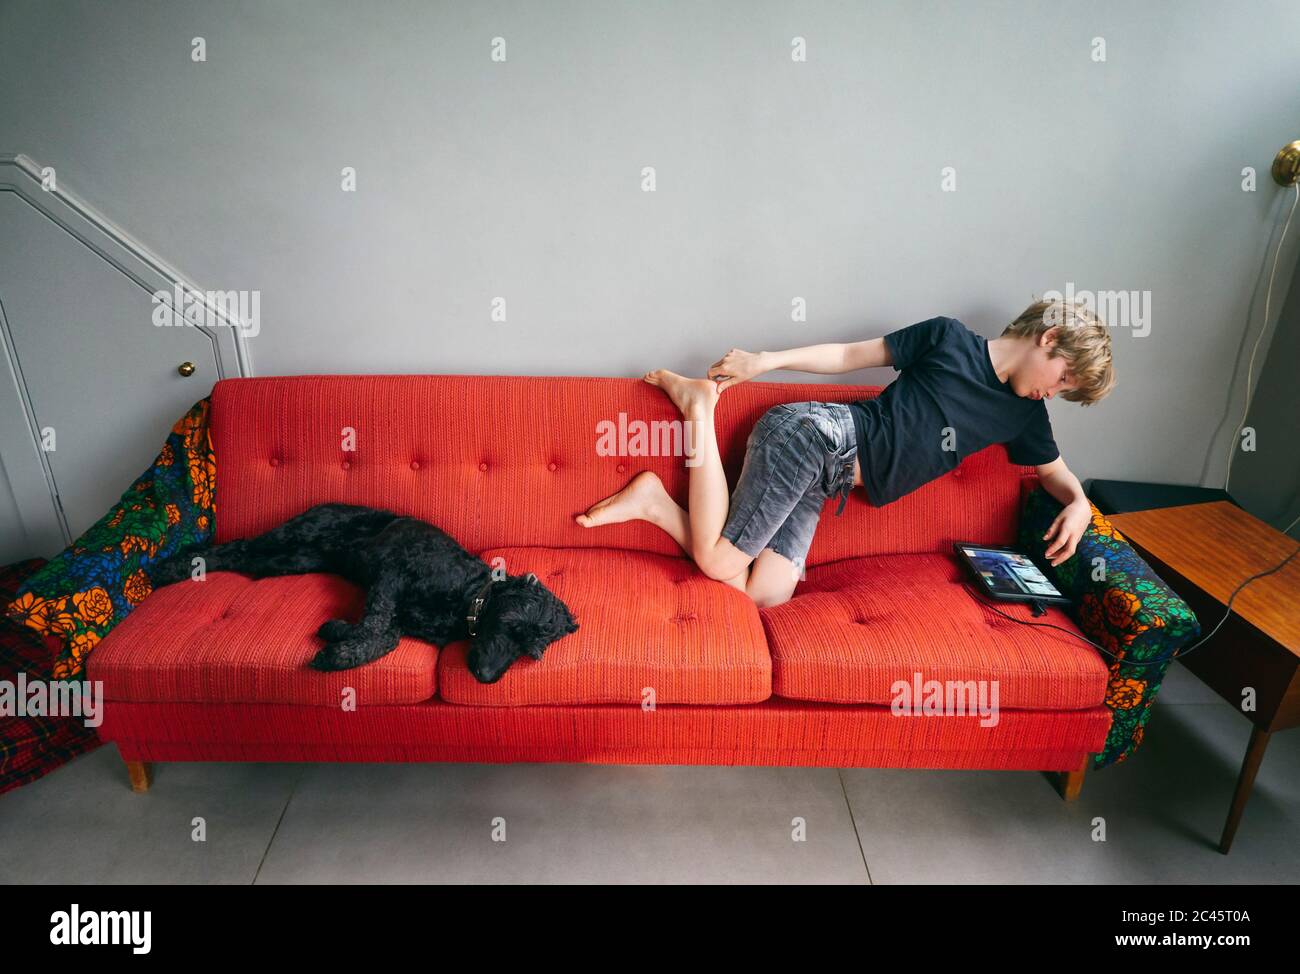 High angle view of boy and black dog lying on red sofa, Vasterbottens Lan, Sweden. Stock Photo